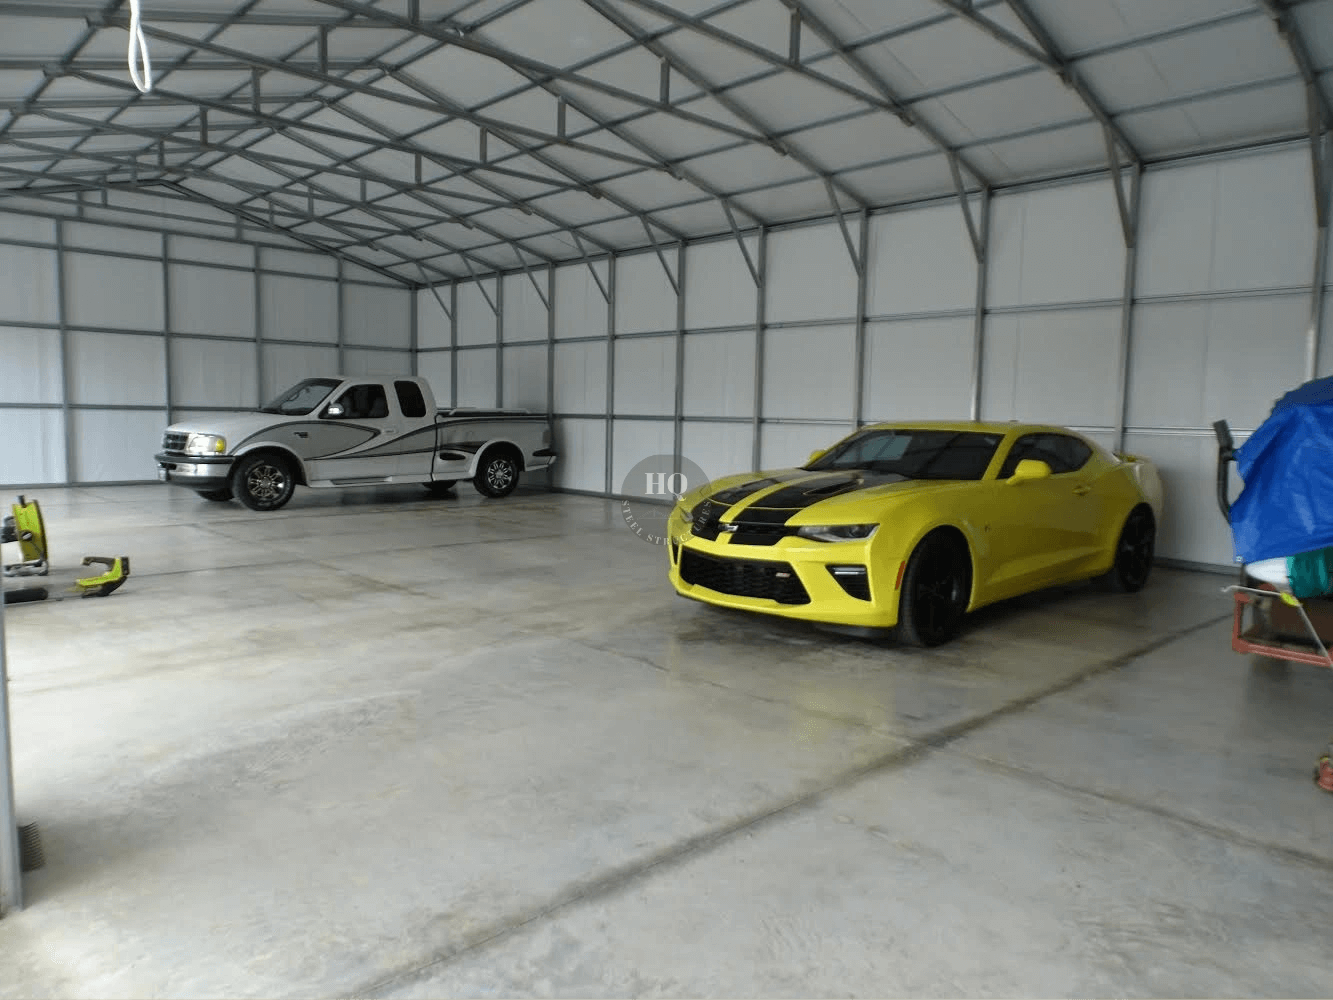 A yellow car and silver truck in a garage.